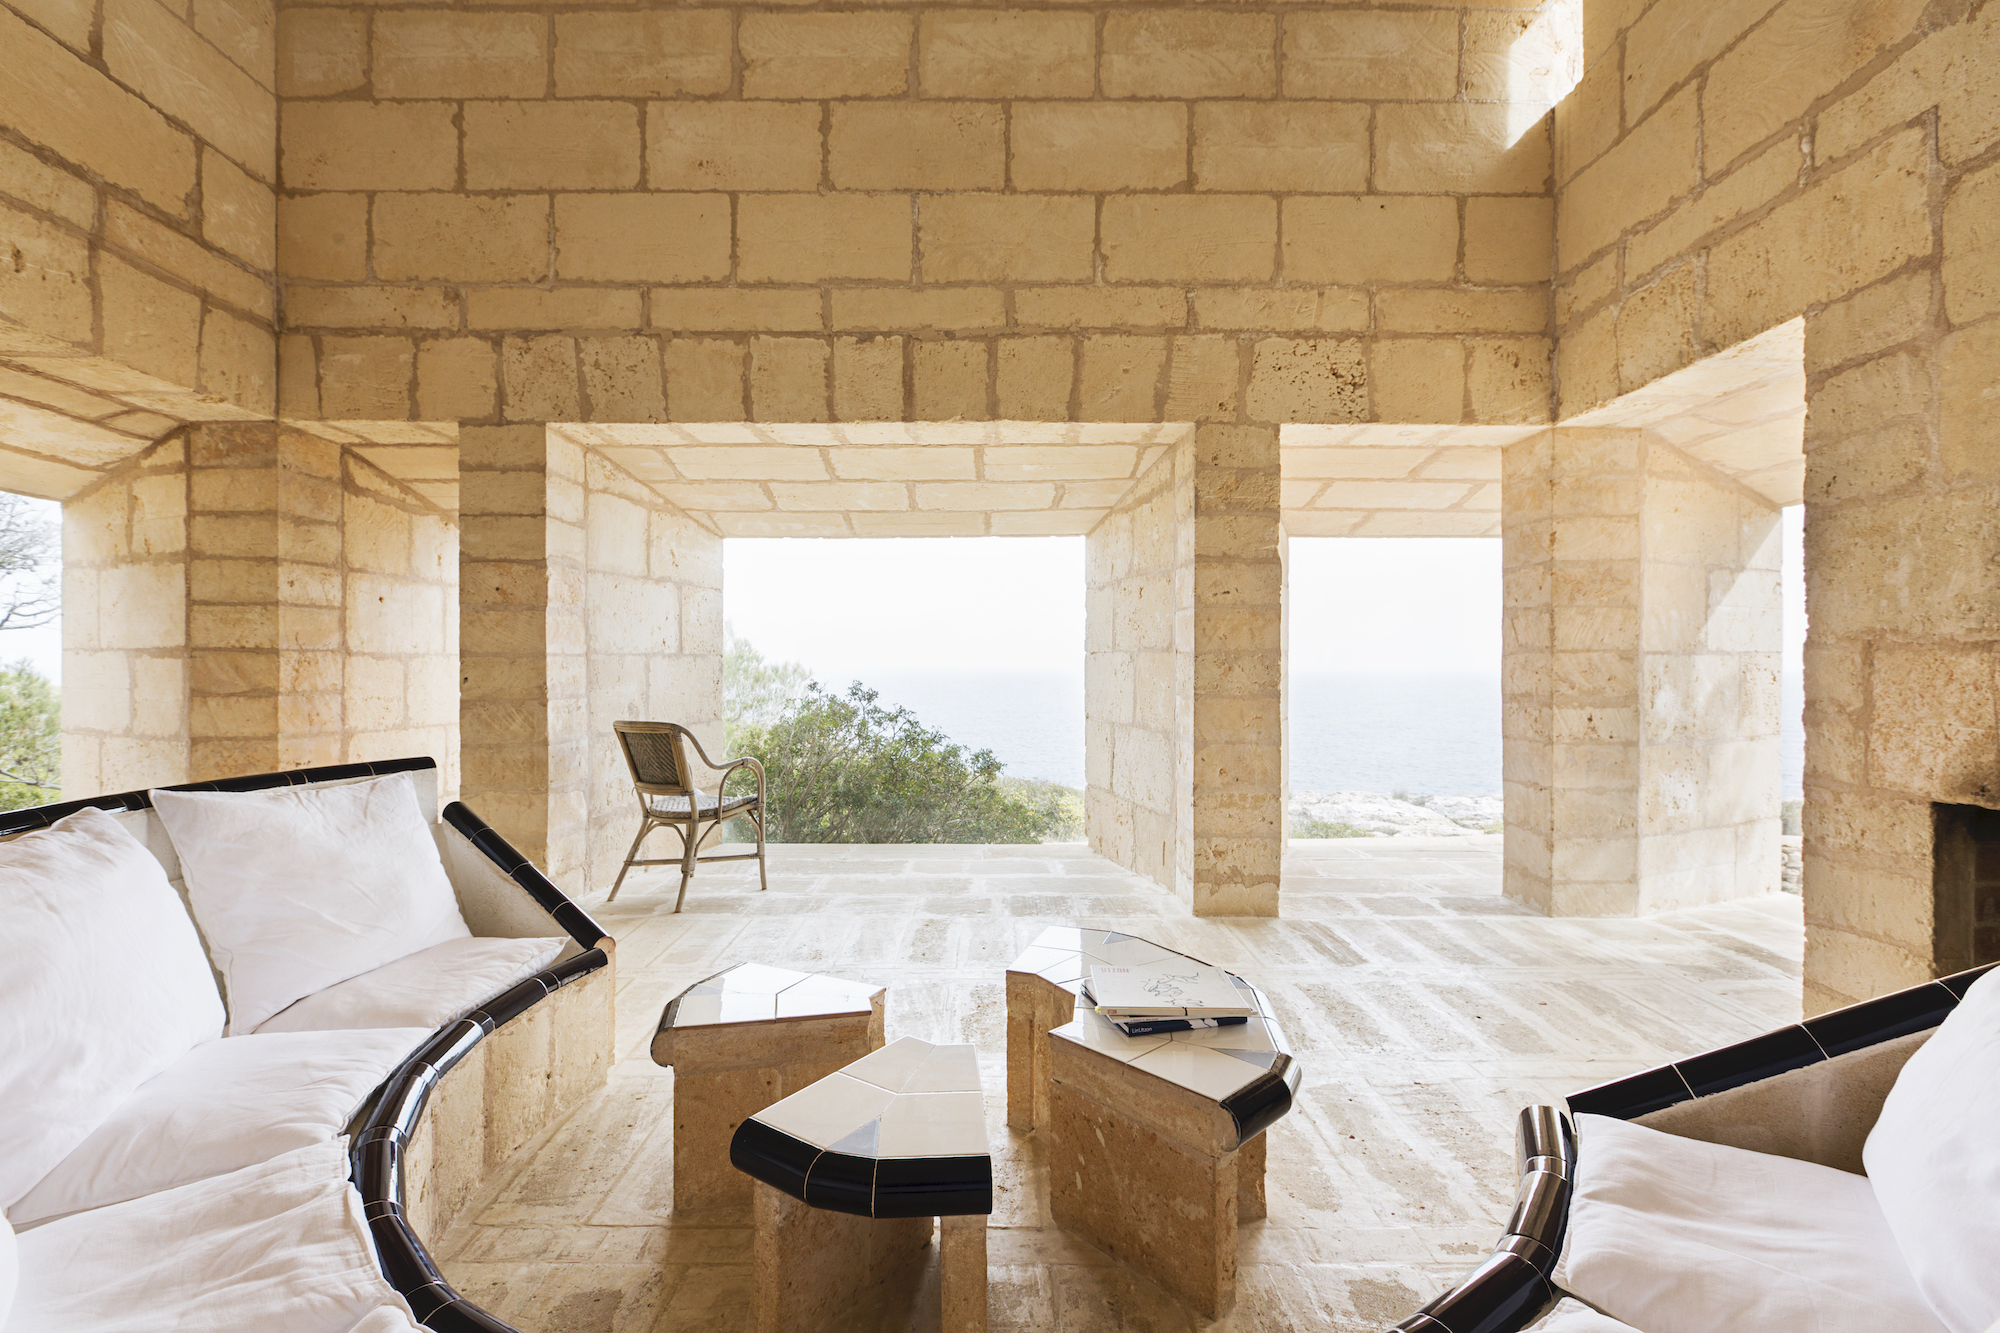 Secluded hideaway Can Lis was designed by Danish modernist architect Jørn Utzon on the southern coast of Mallorca. The deep loggias protect the interior from the strong sun - Effect Magazine